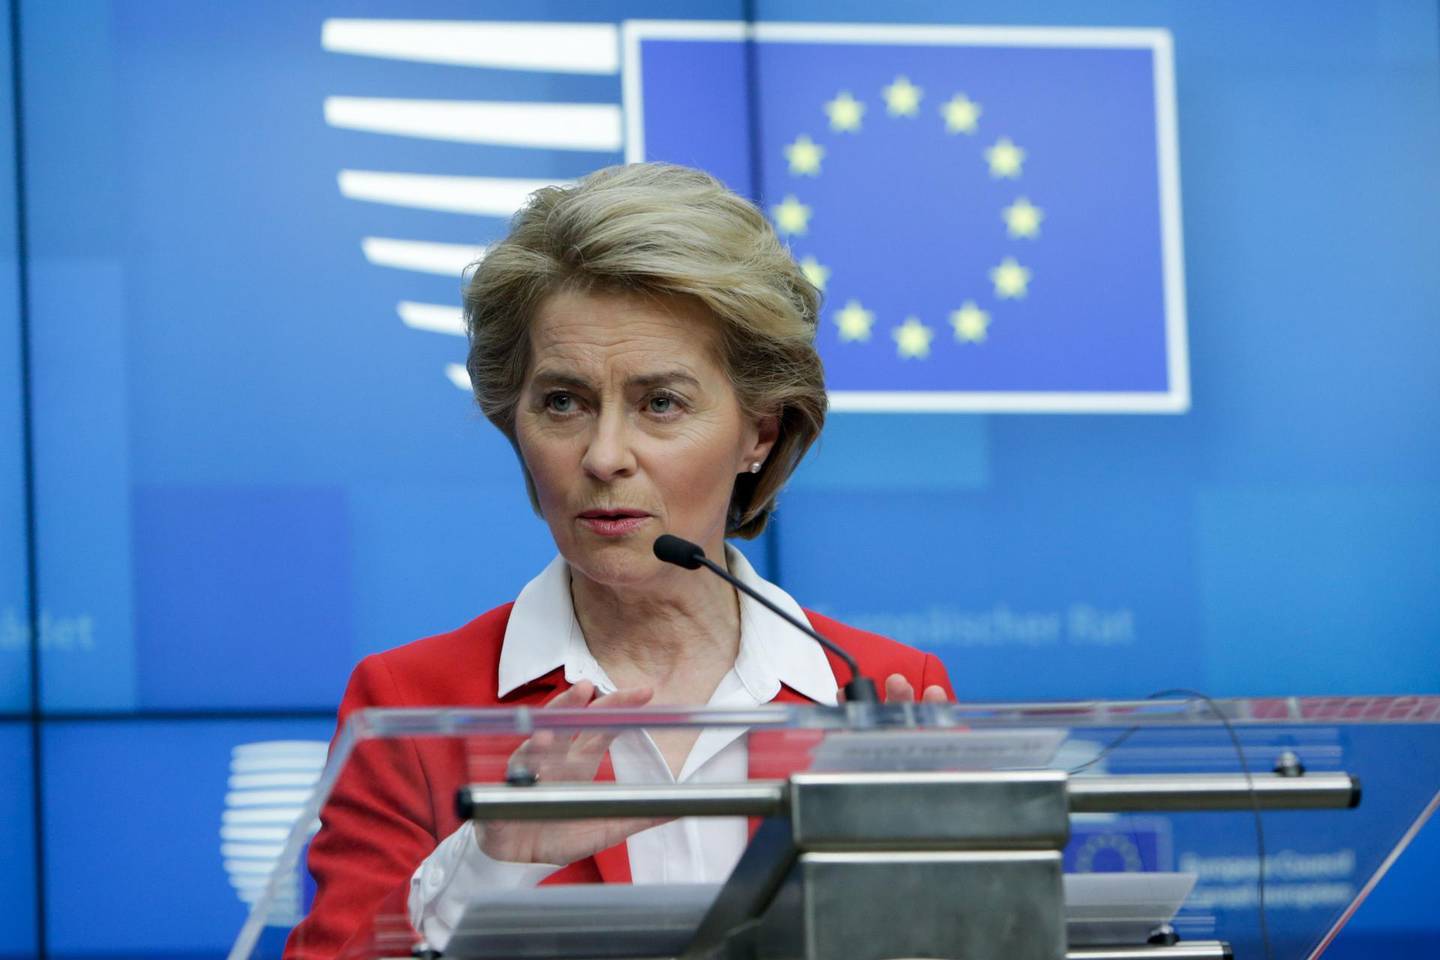 President of European Commission, Ursula Von der Leyen, gives a press conference after EU leaders' video conference on COVID-19, caused by the novel coronavirus, at the European Council building in Brussels, on March 17, 2020. / AFP / Aris Oikonomou
